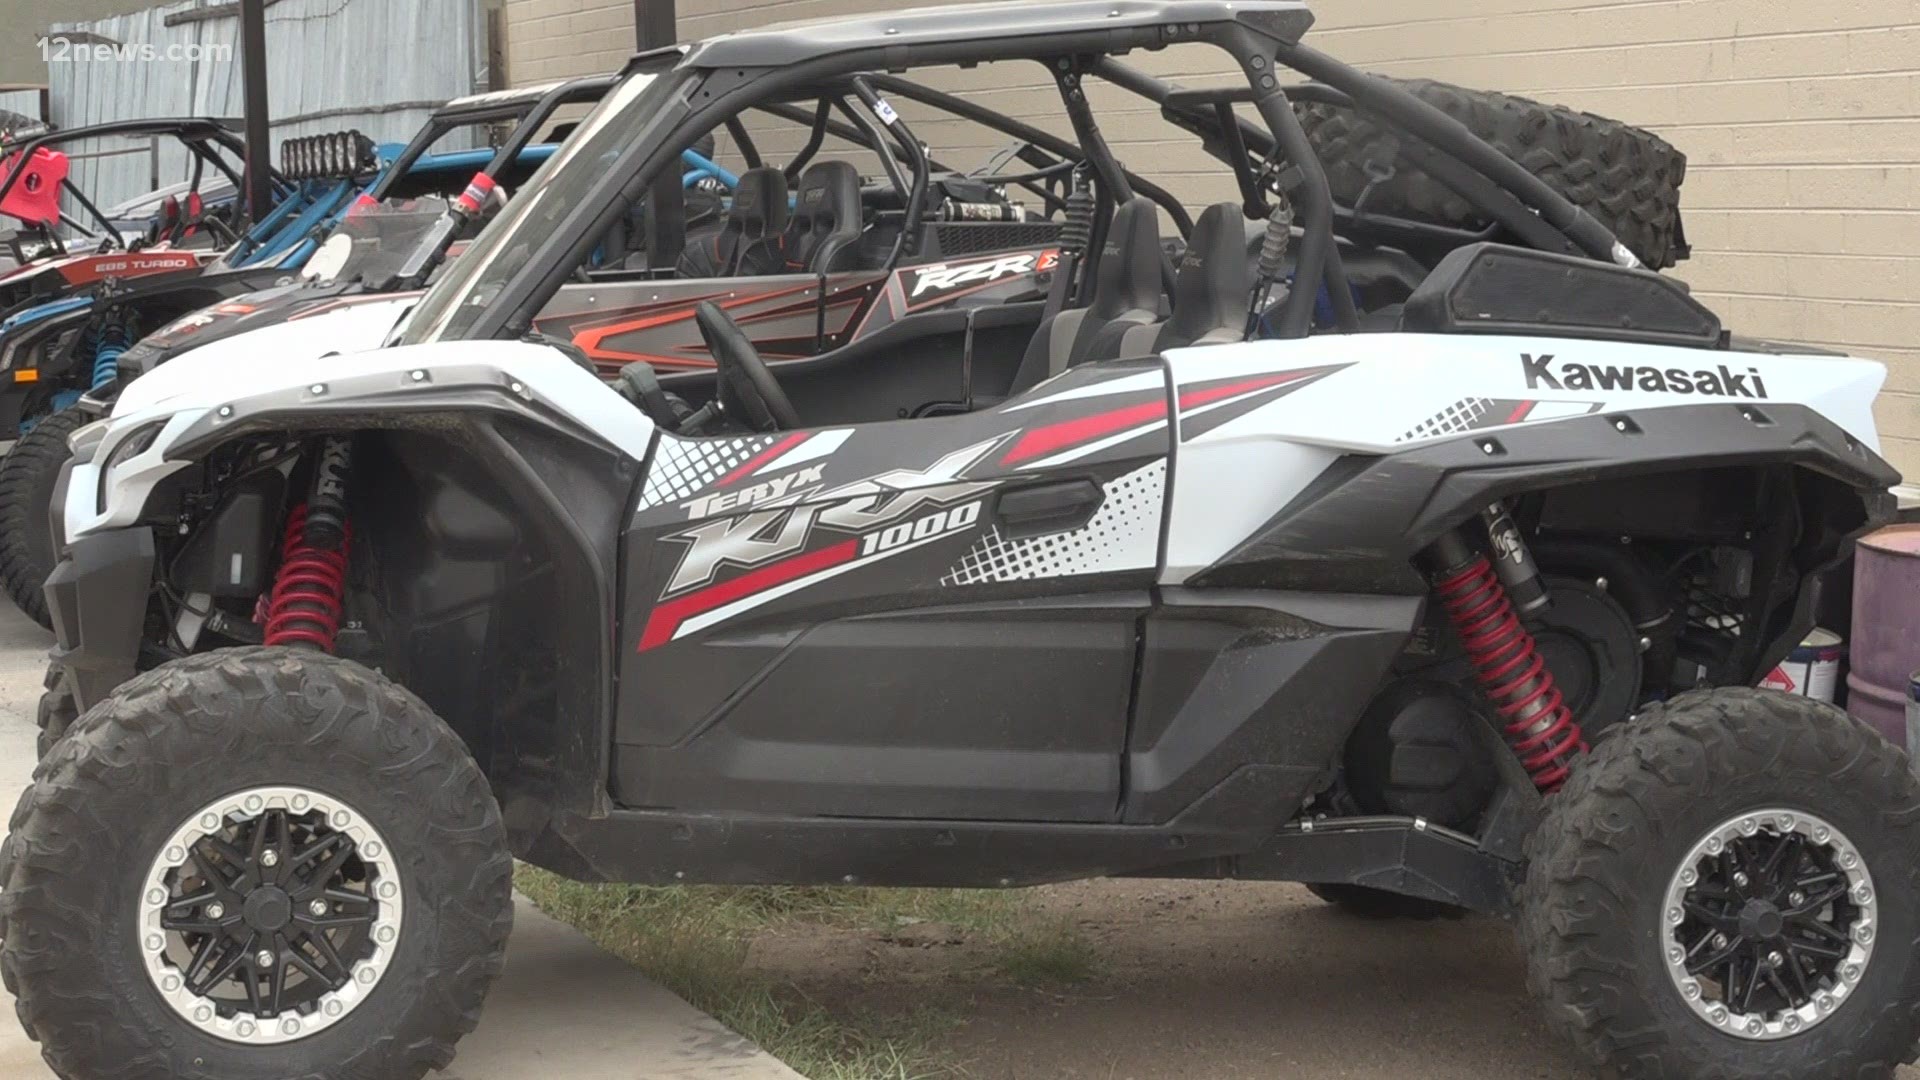 UTV takeover night ride.....watch the can am roll over and keep going -  YouTube